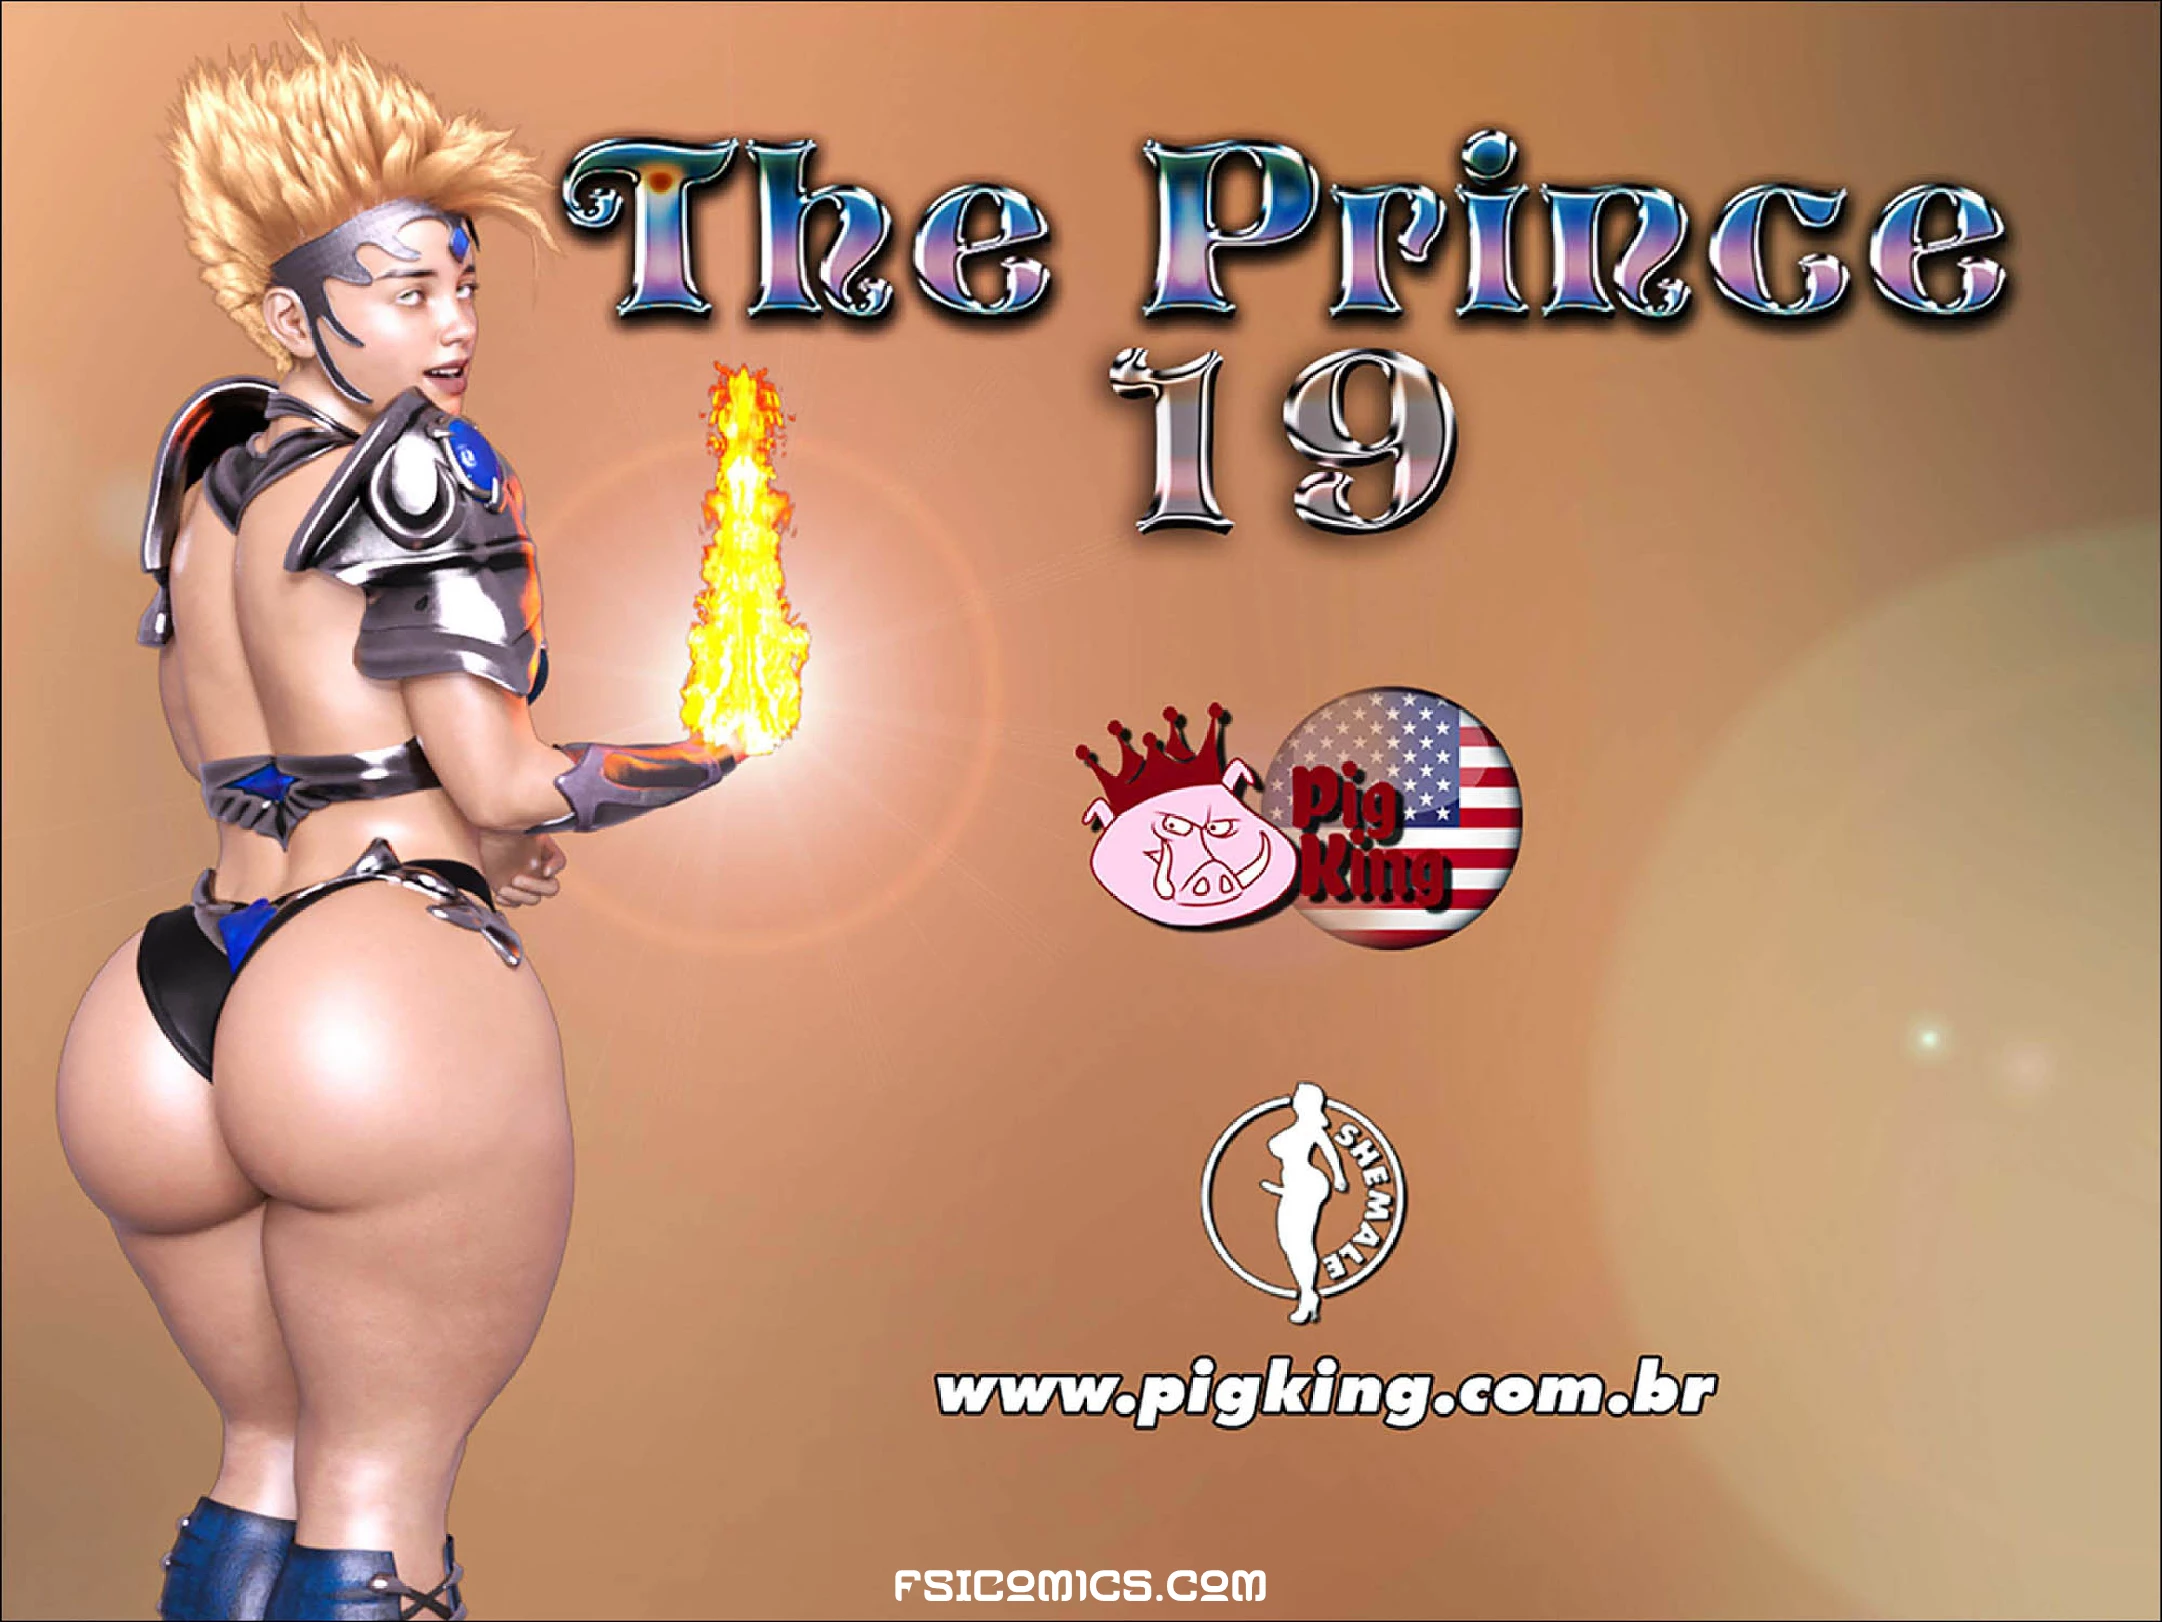 The Prince Chapter 19 – PigKing - 188 - FSIComics